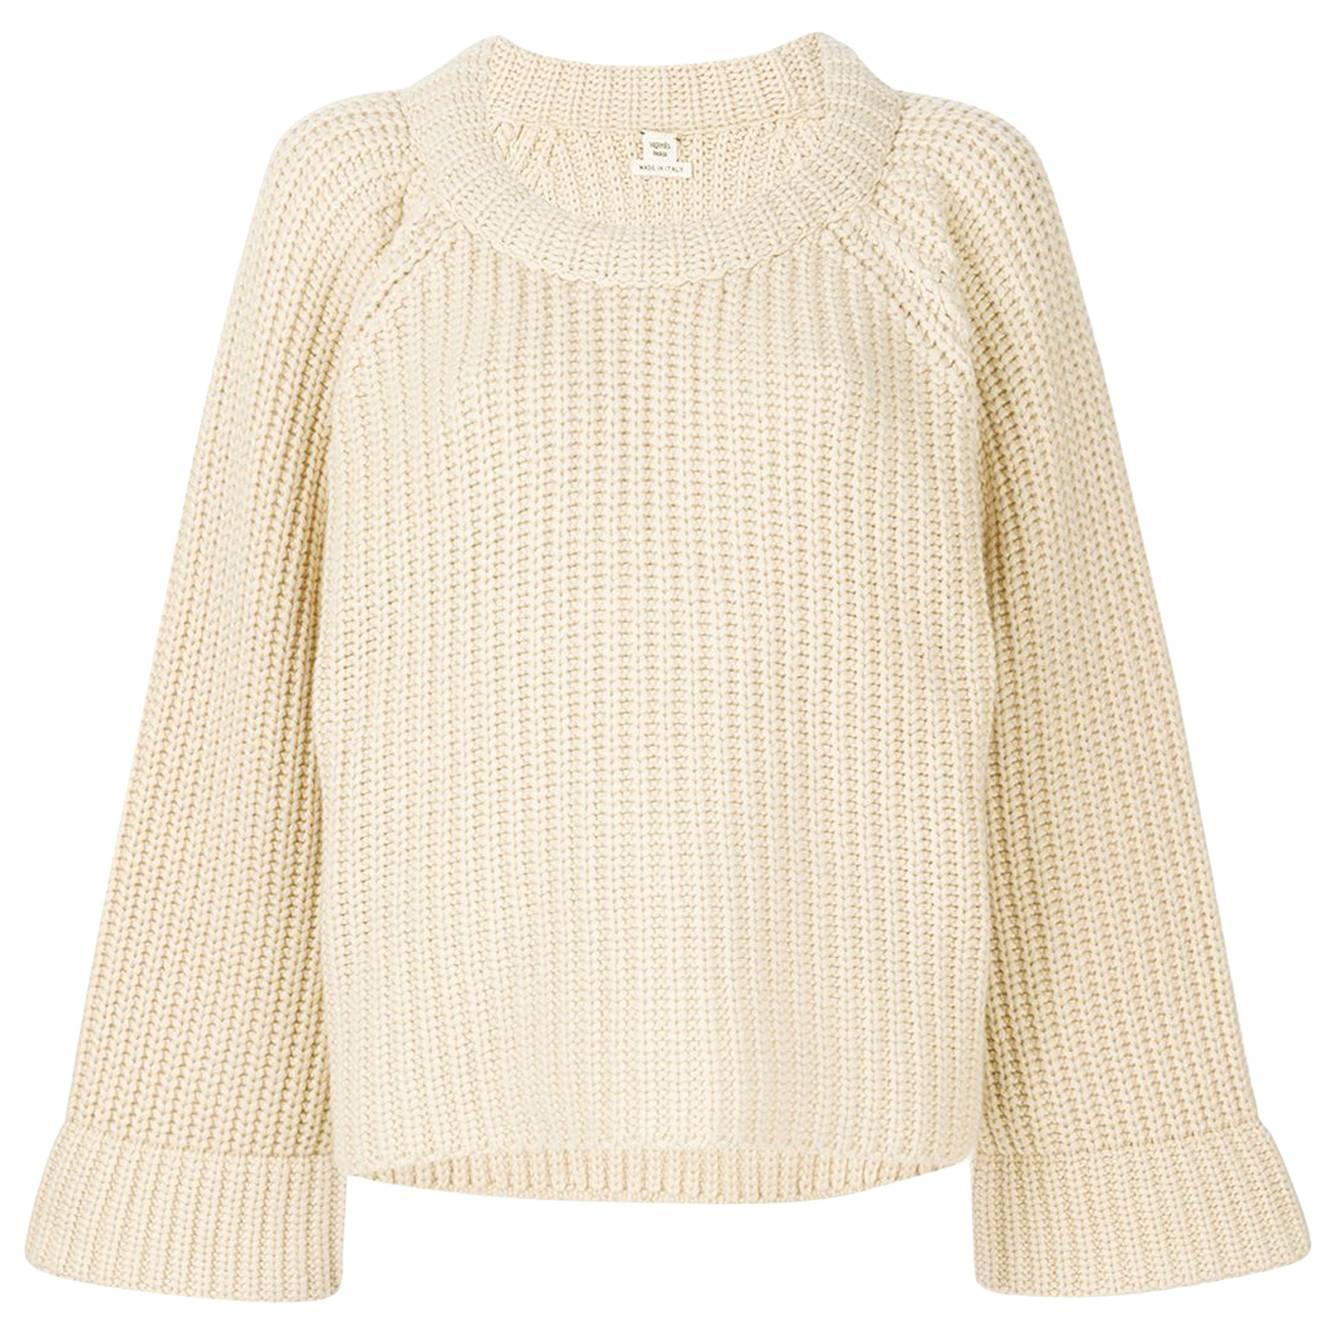 Hermes Chunky Knit Cashmere/Cotton Cream Jumper